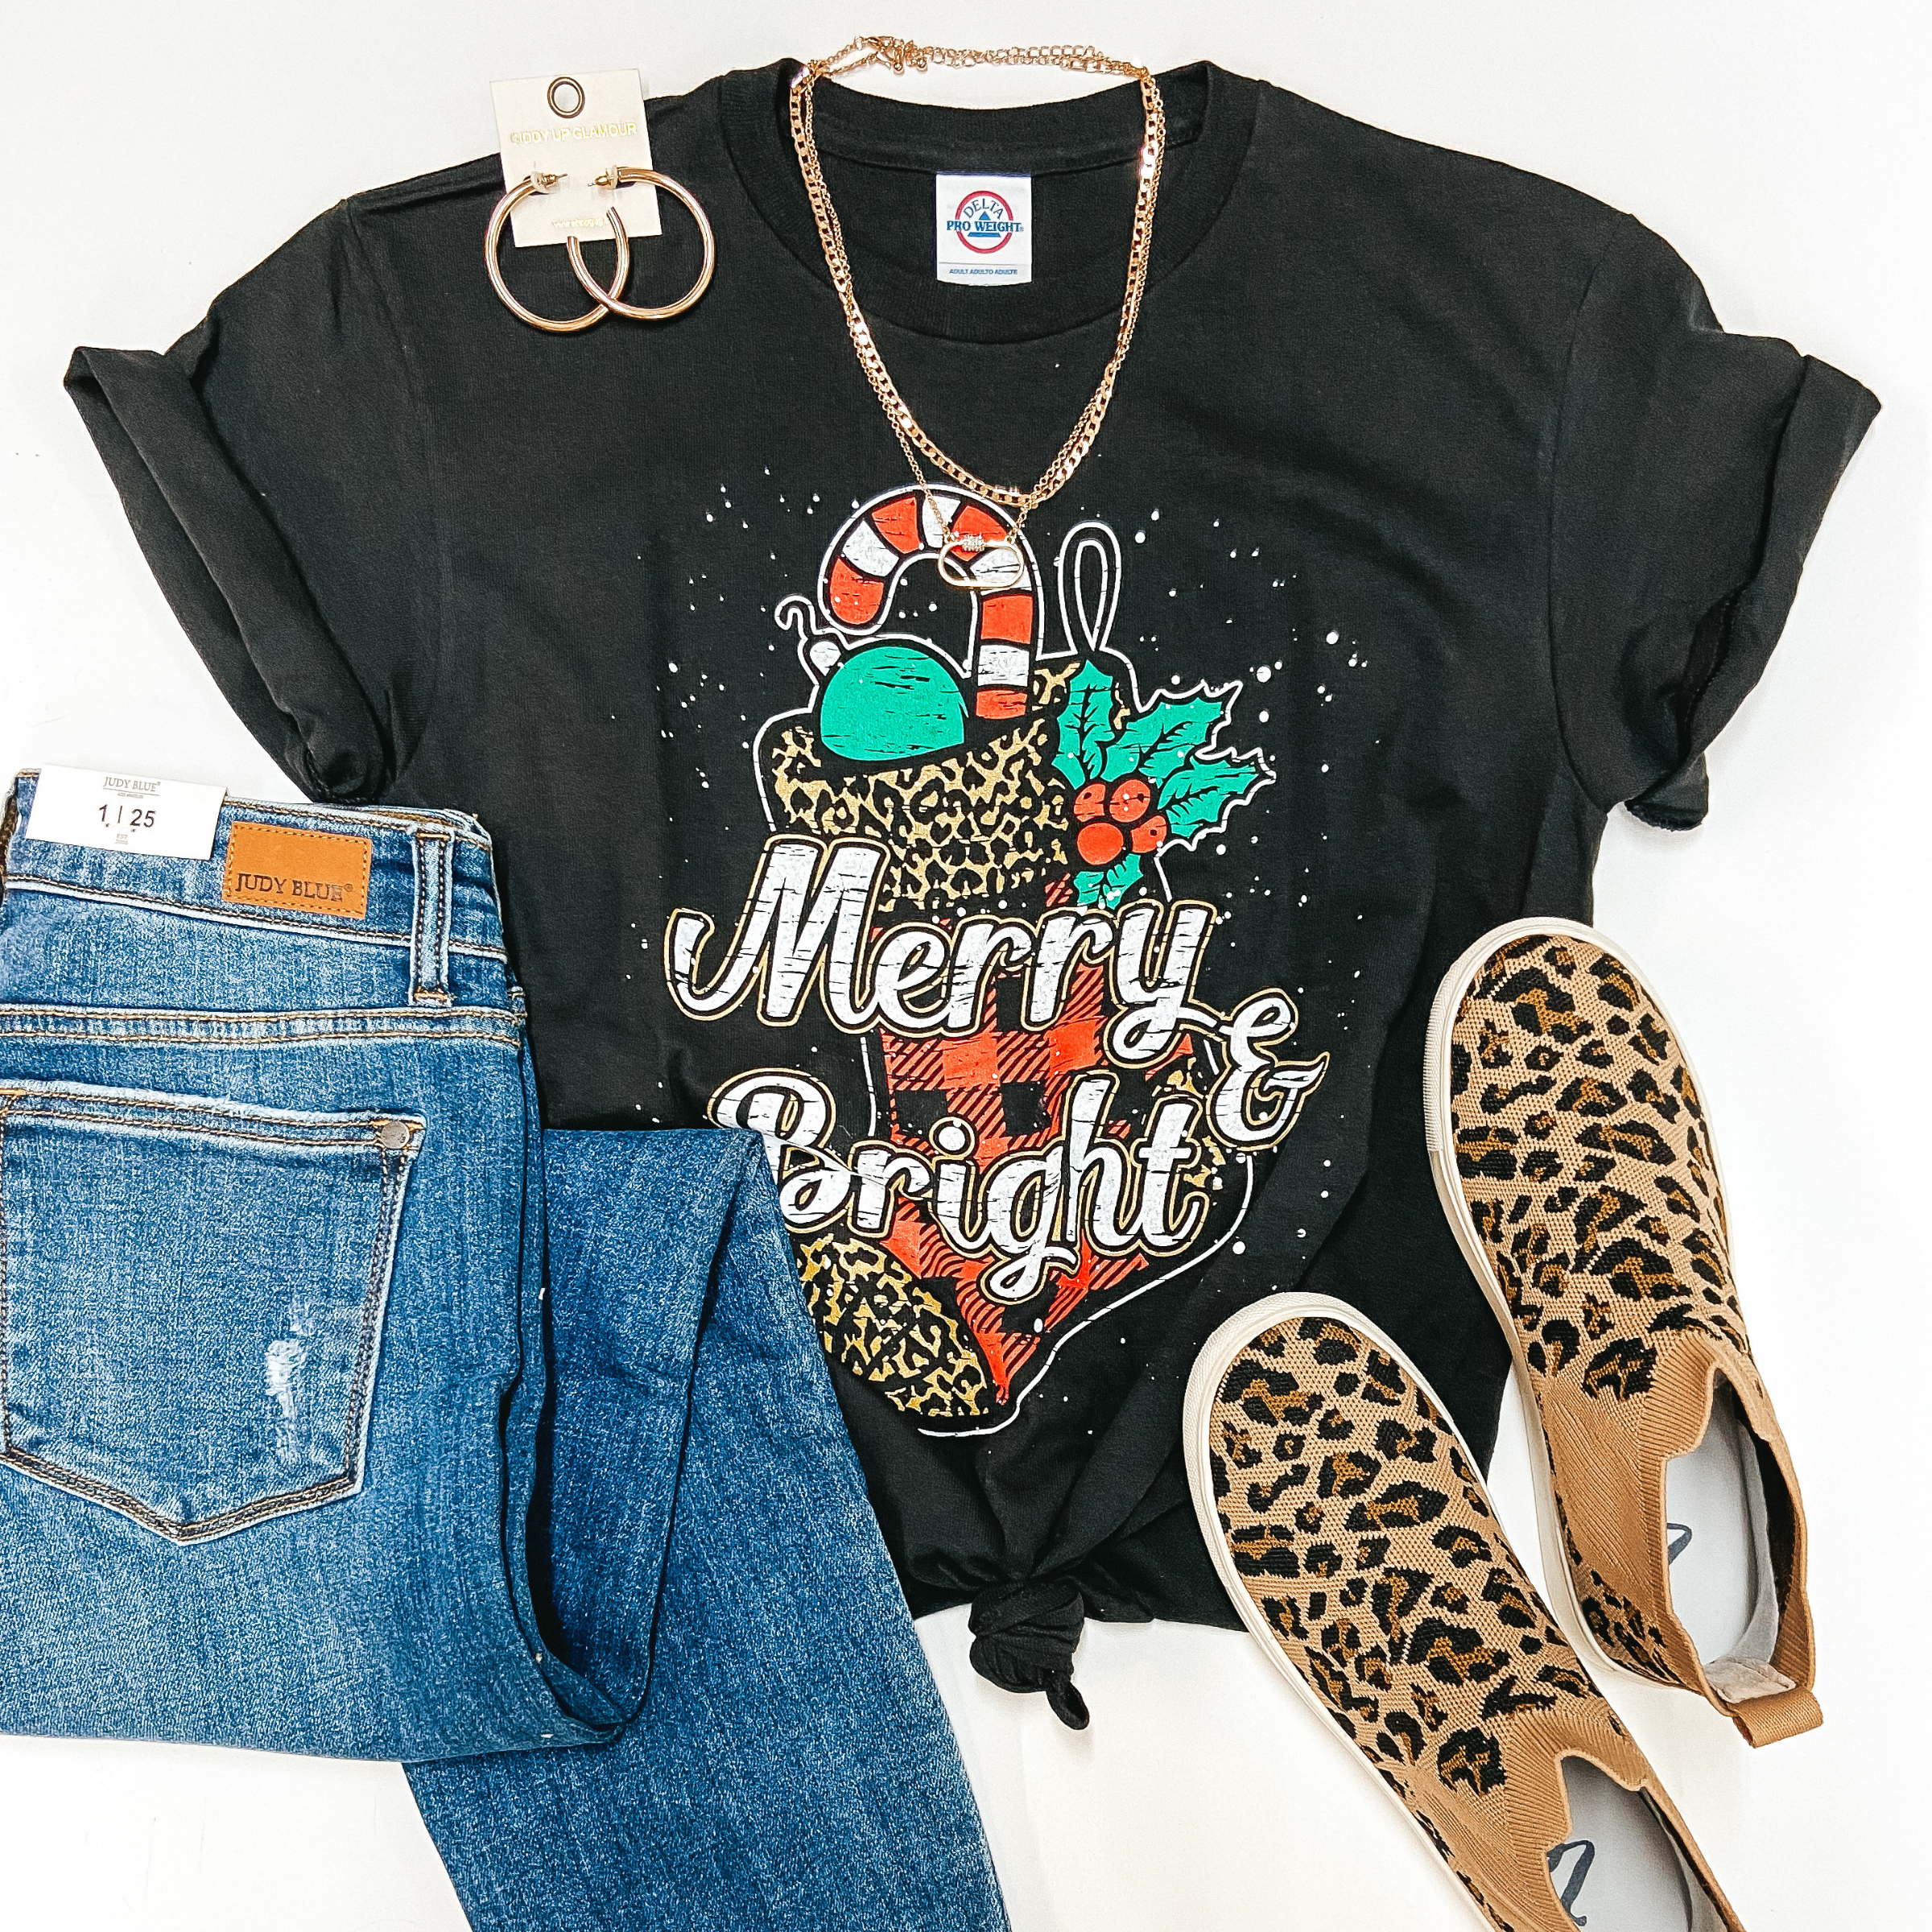 A black tee shirt with cuffed sleeves and knotted front. The tee has a graphic of a leopard stocking and says "Merry and Bright." Pictured on a white background with medium wash jeans, high top leopard sneakers, and gold jewelry.